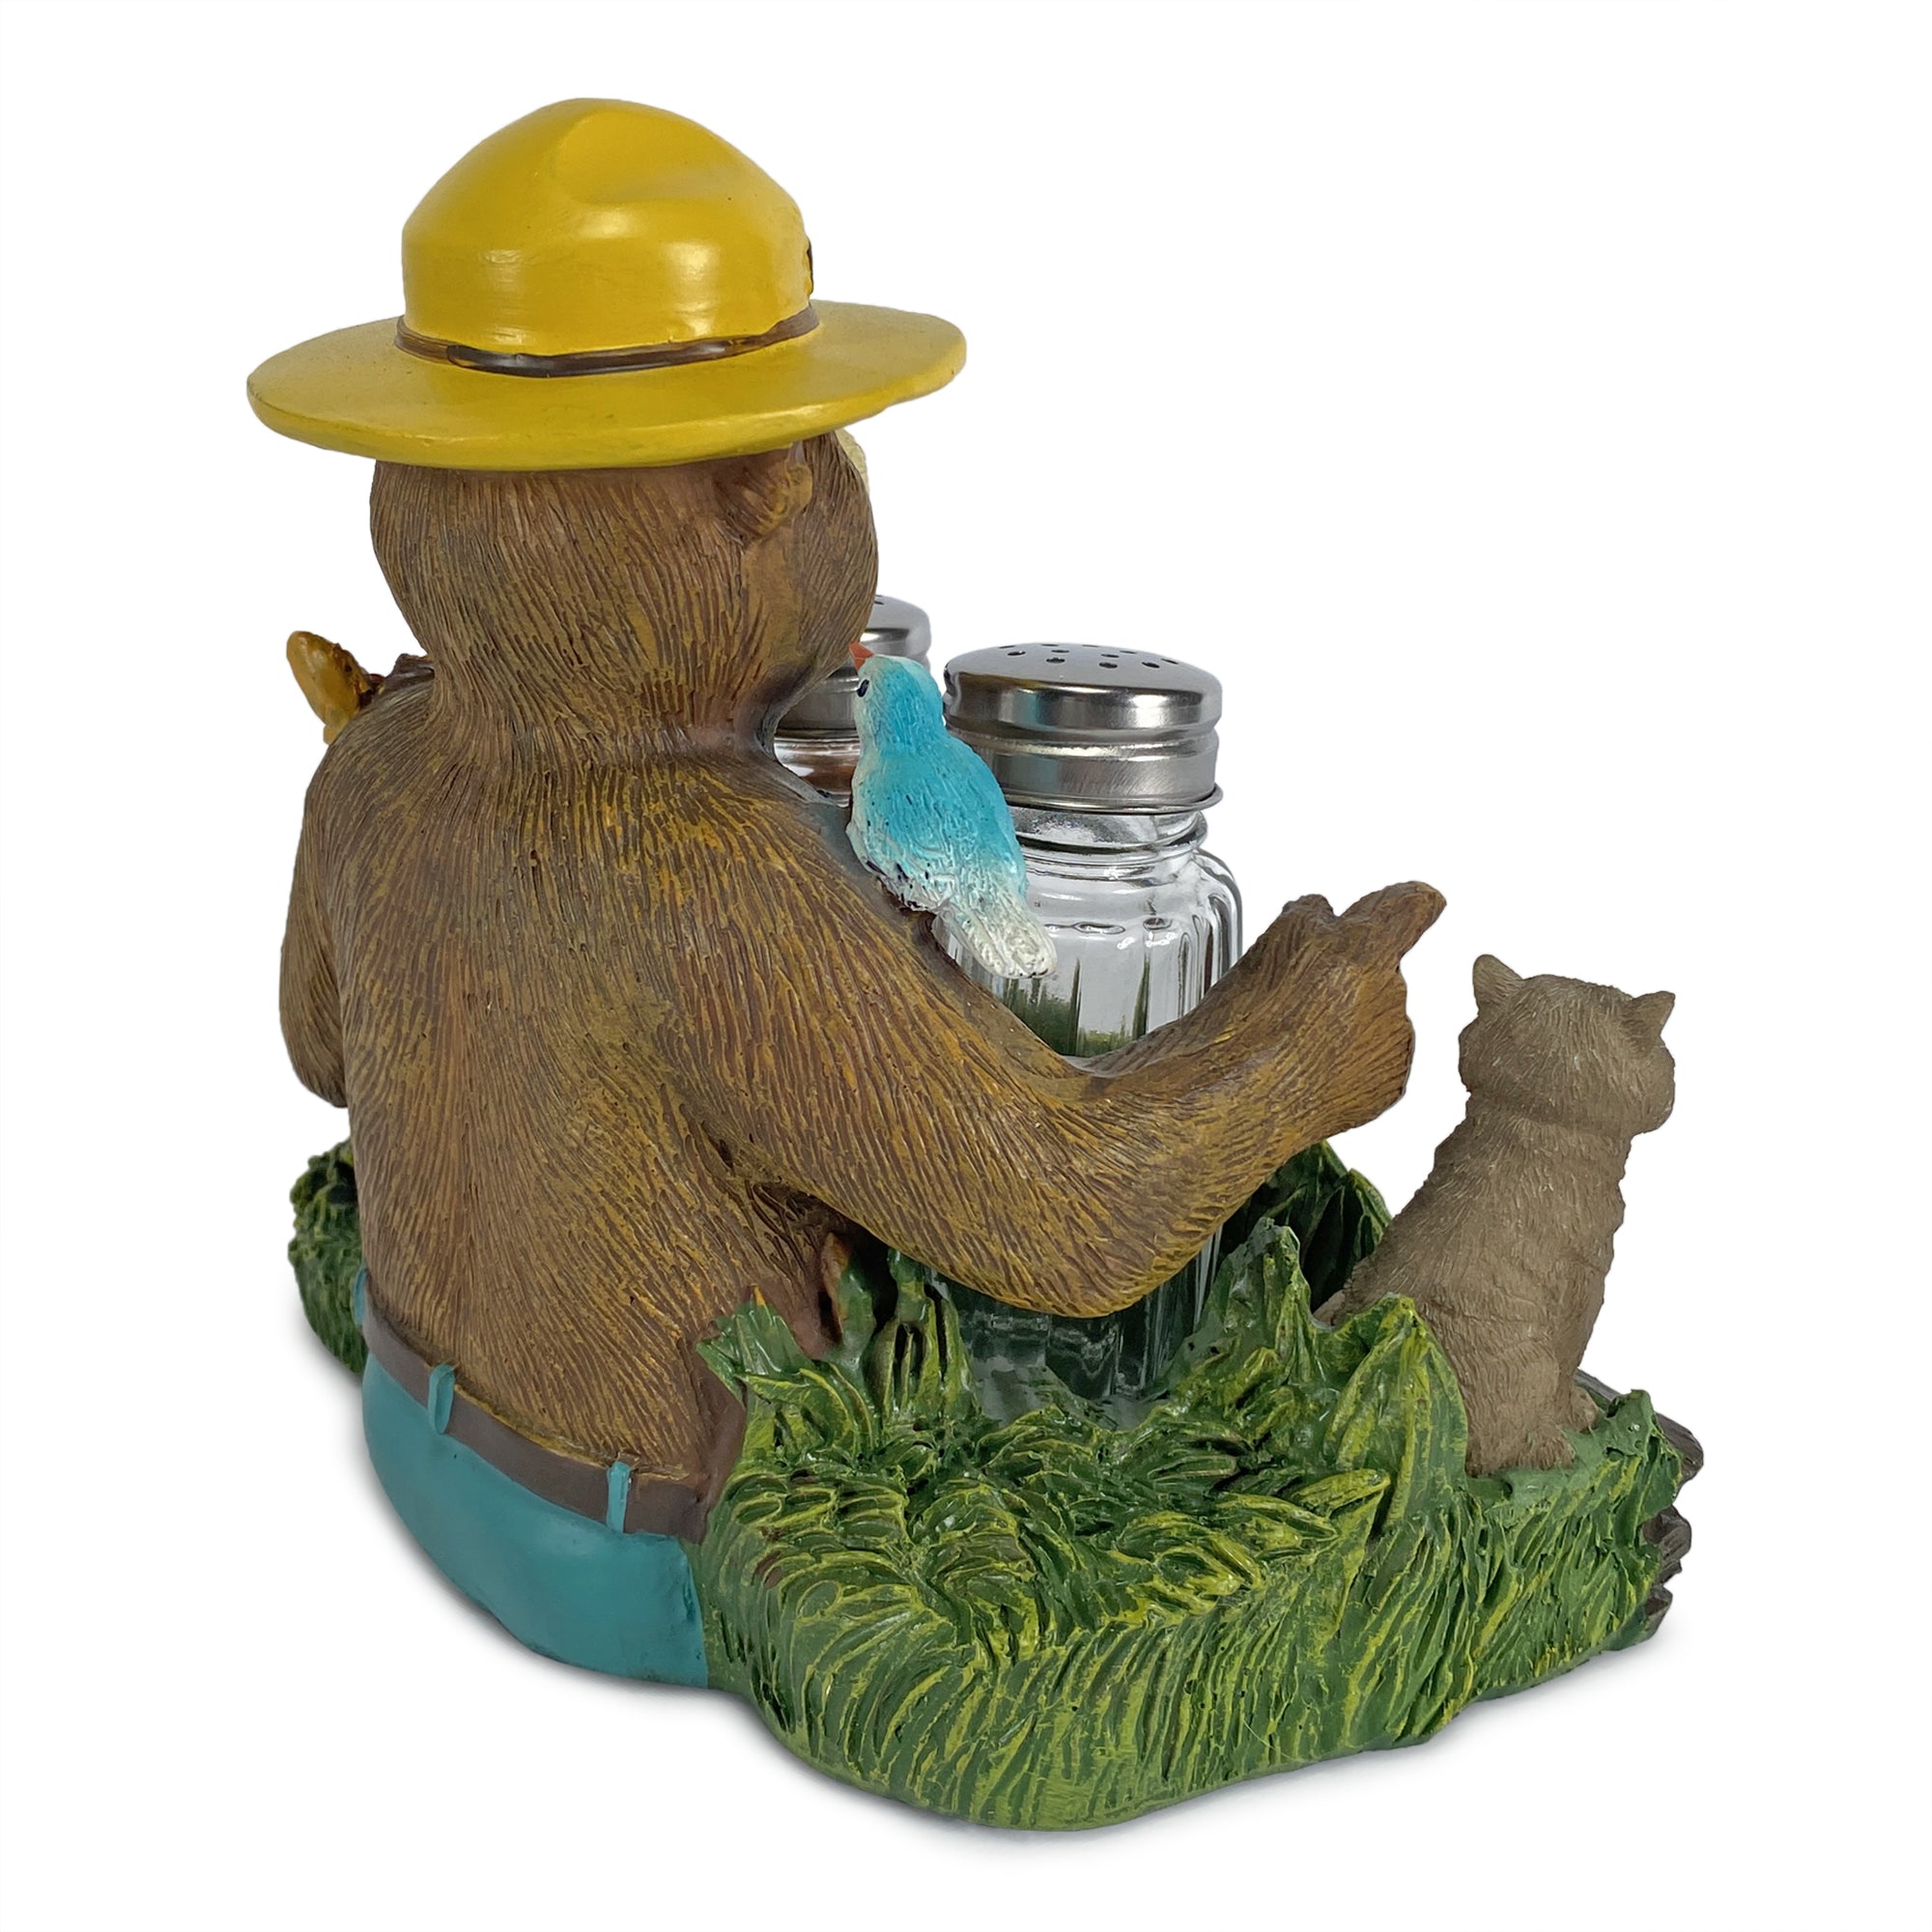 Salt and Pepper Shakers - Smokey Friends & Nature